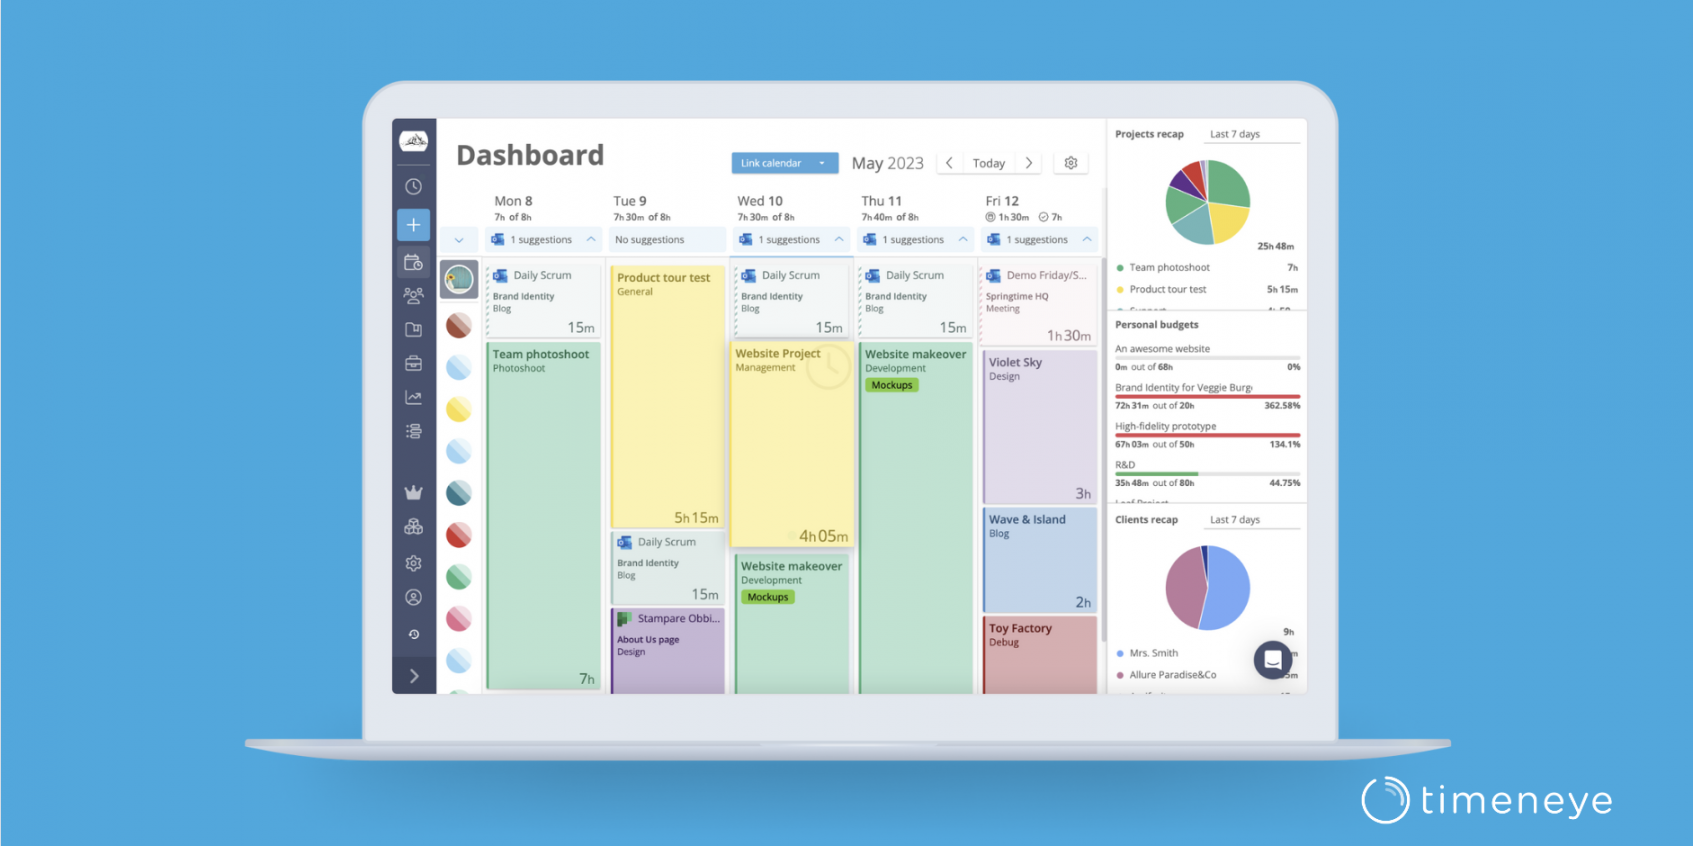 Maximize your day: get Productive with Outlook Calendar